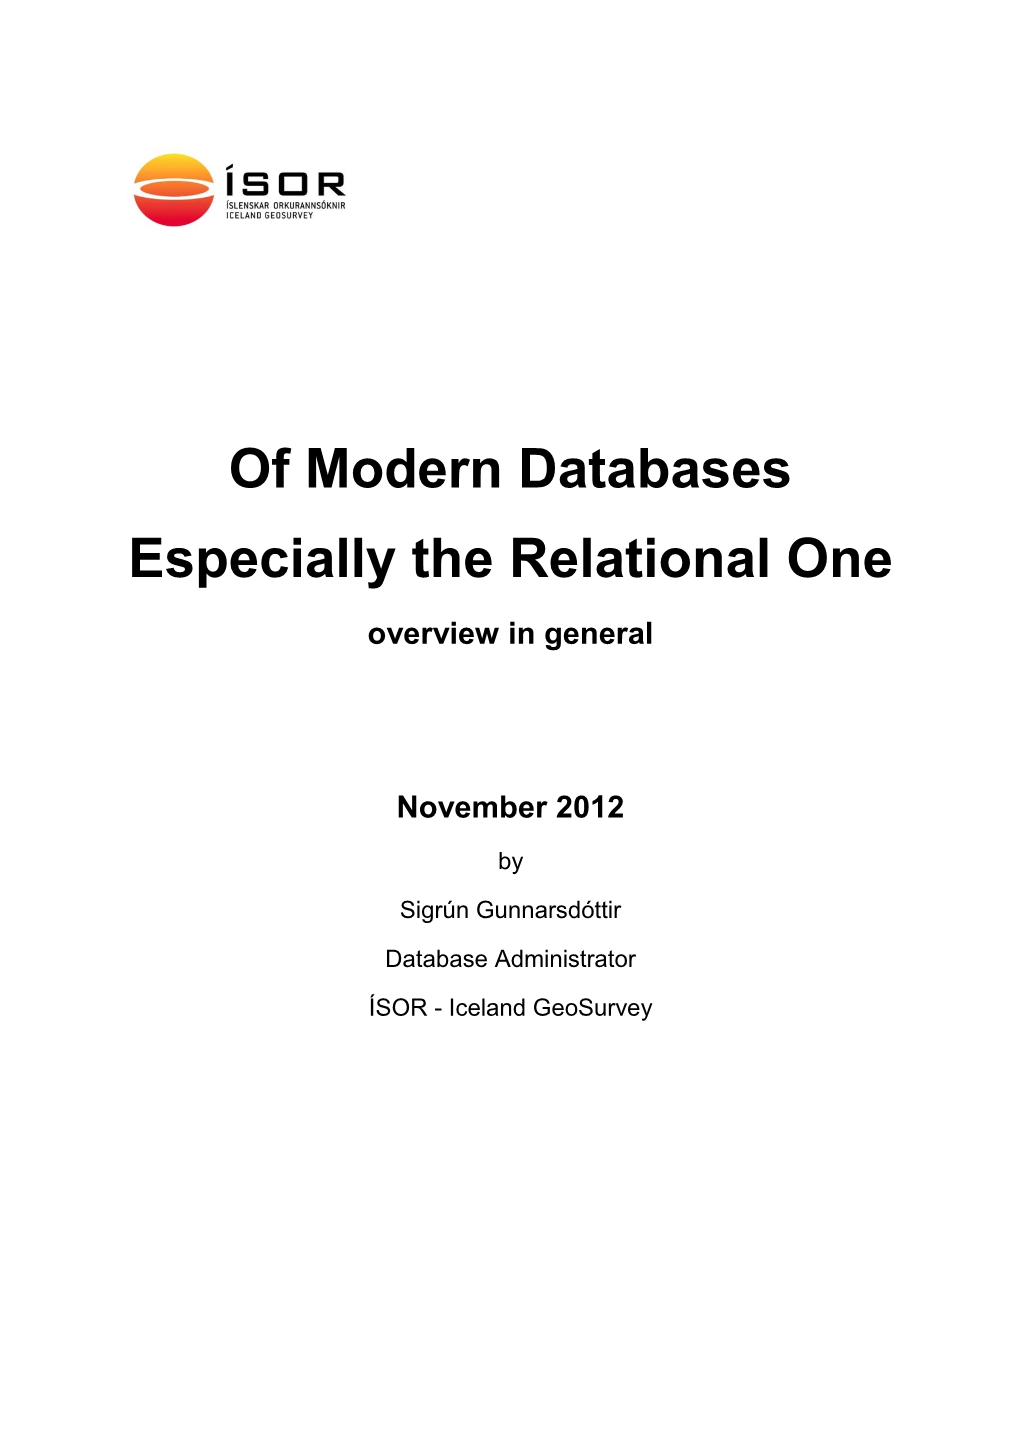 Of Modern Databases Especially the Relational One